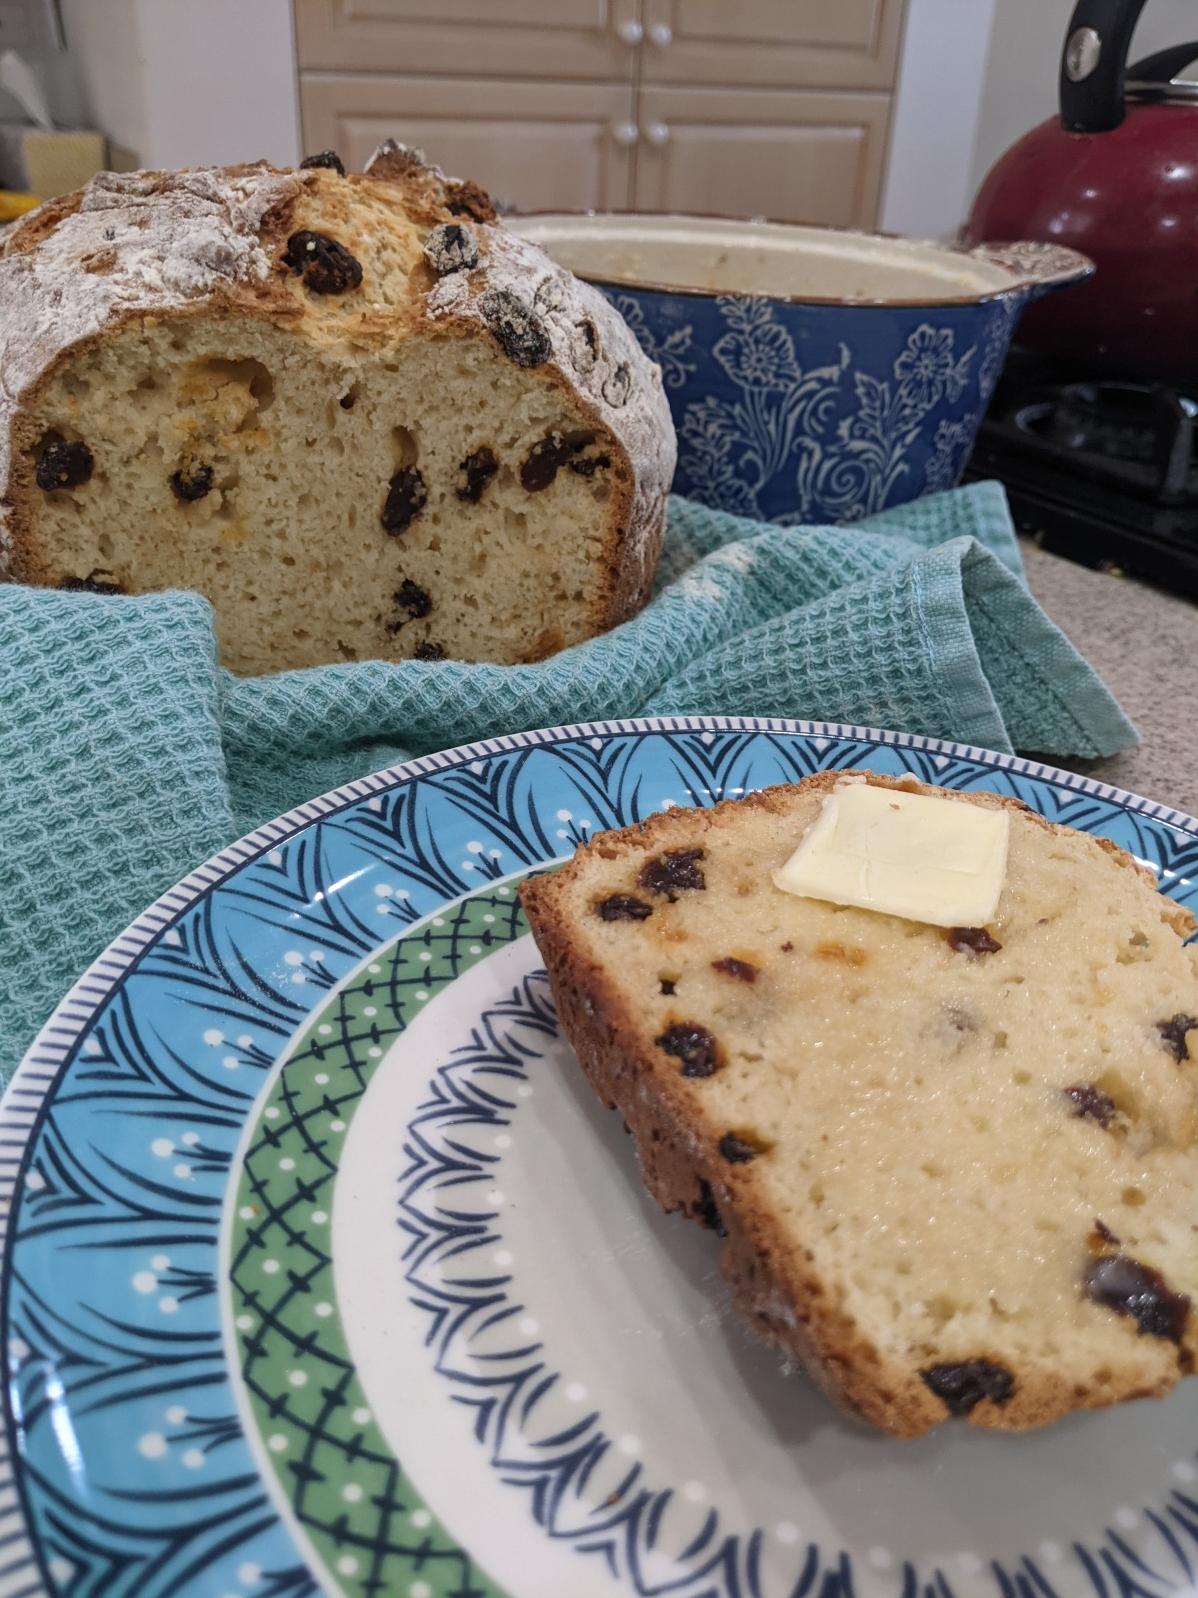  My Nana's Soda Bread recipe that has been passed down for generations